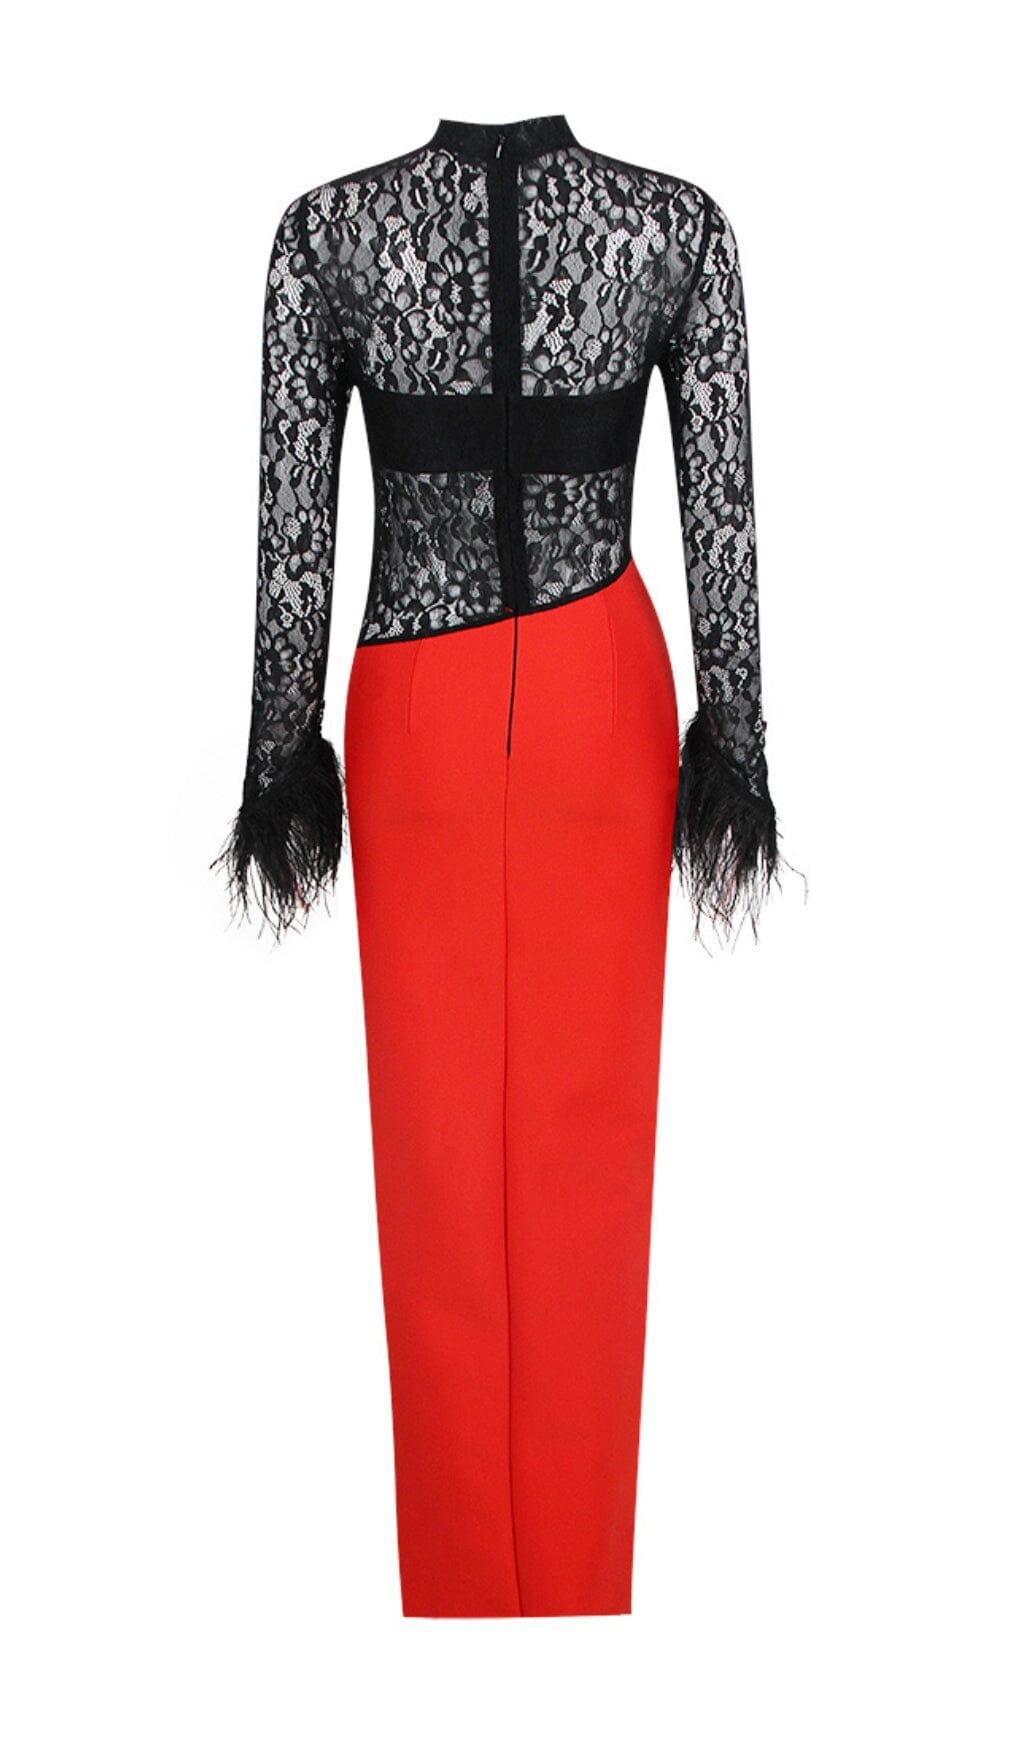 SPLICED LACE FEATHER SLIT DRESS IN BLACK AND RED